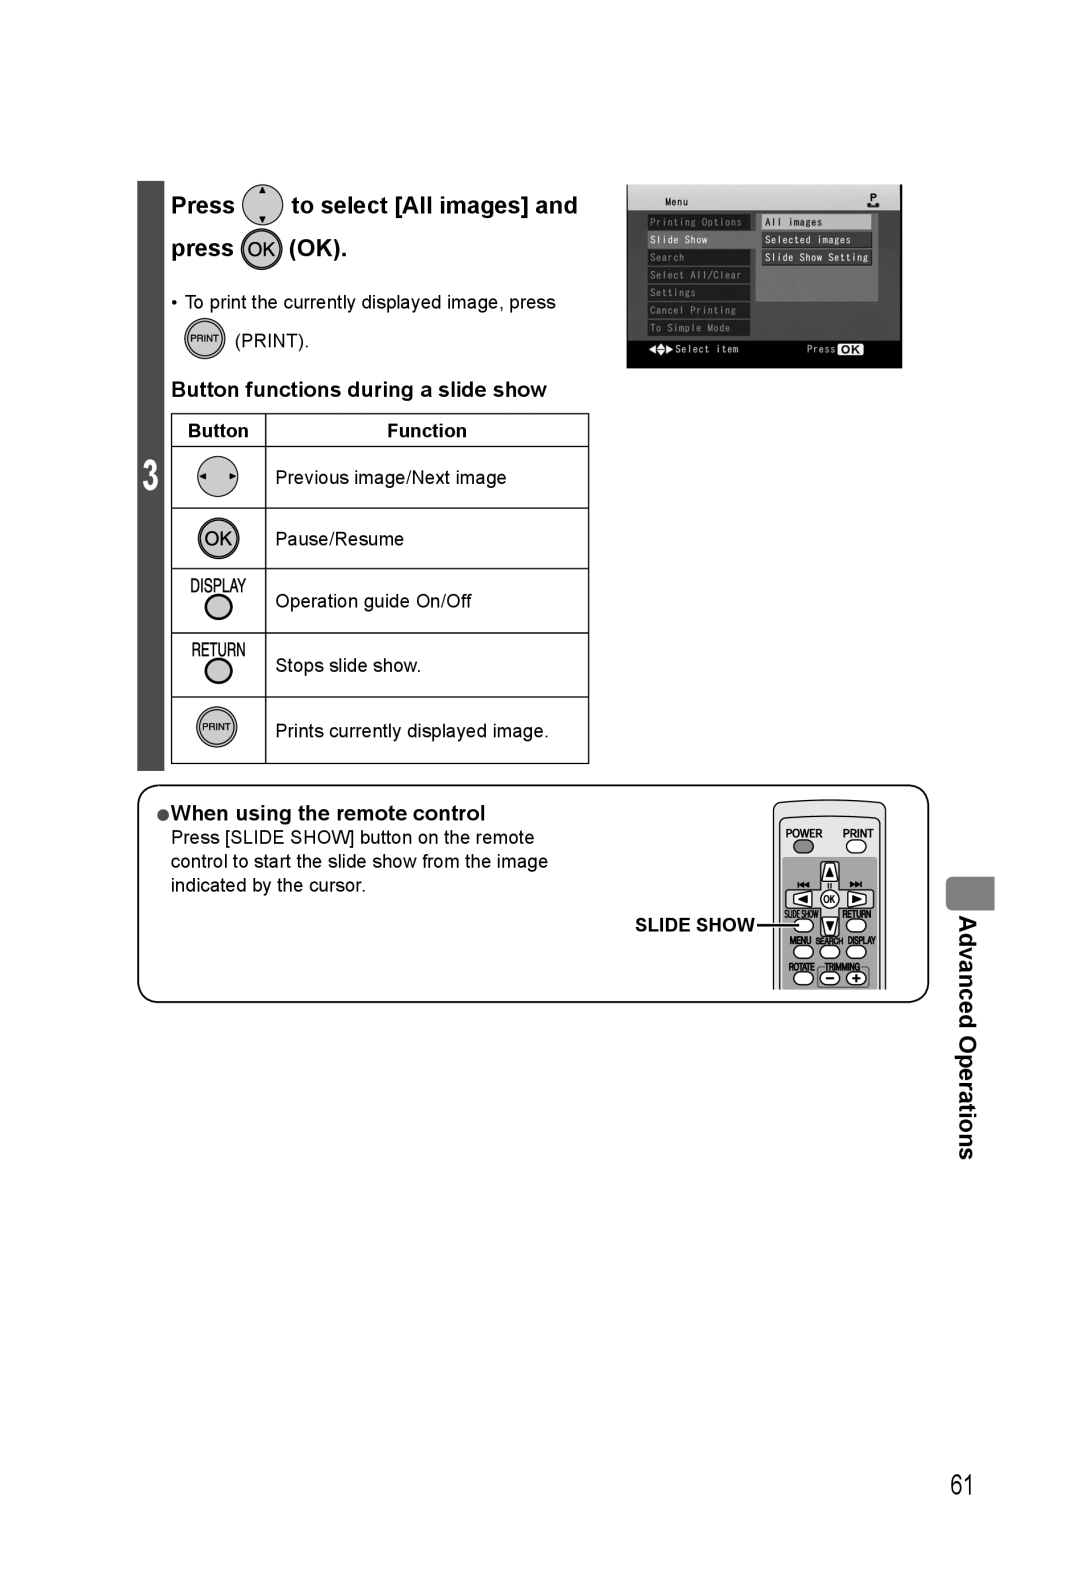 Panasonic KX-PX20M Press to select All images and press OK, Advanced Operations, Button, Function, Slide Show 